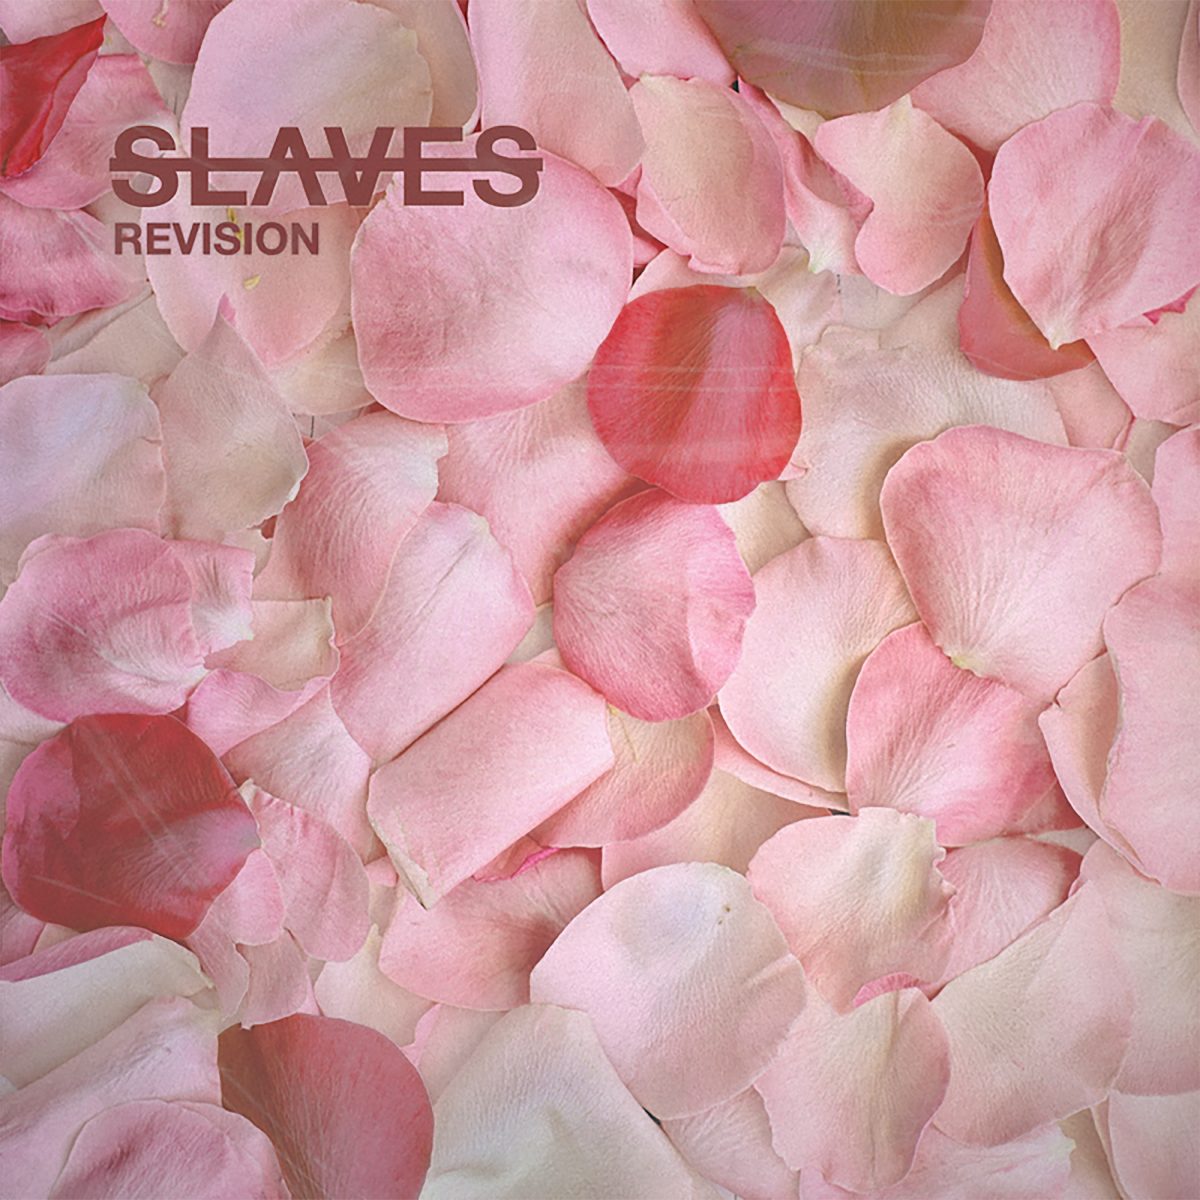 Album Review Slaves Revision Ep Music Existence